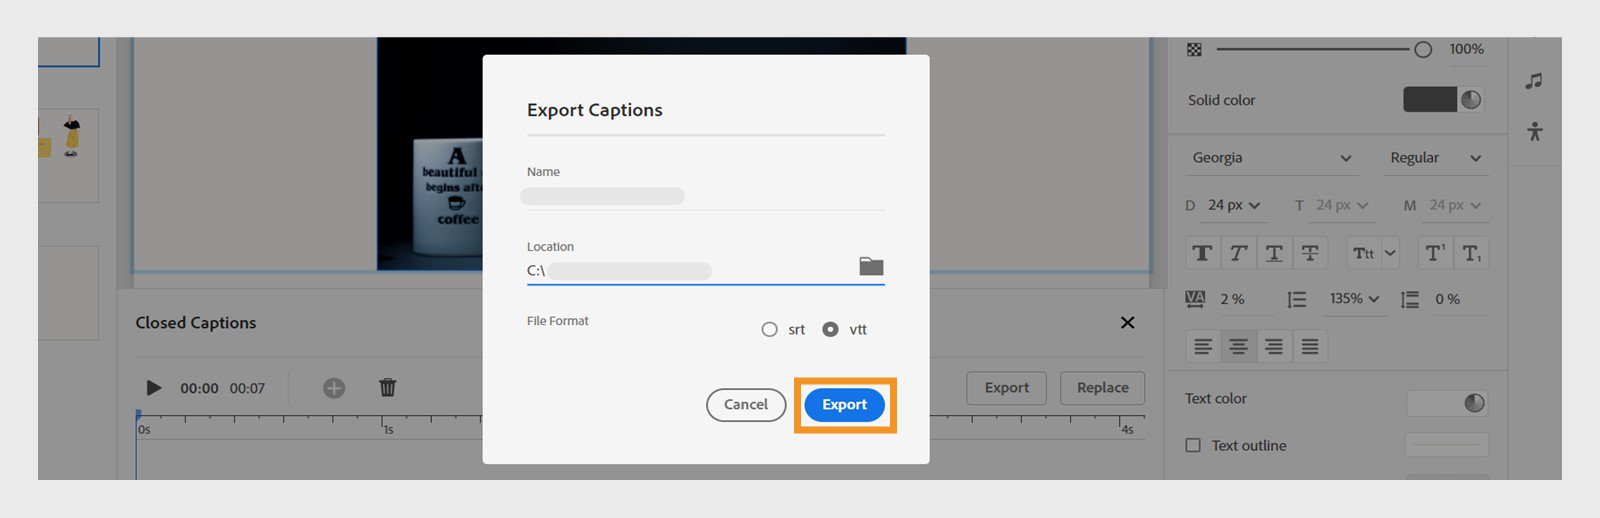 Choose the file name and location for exporting captions